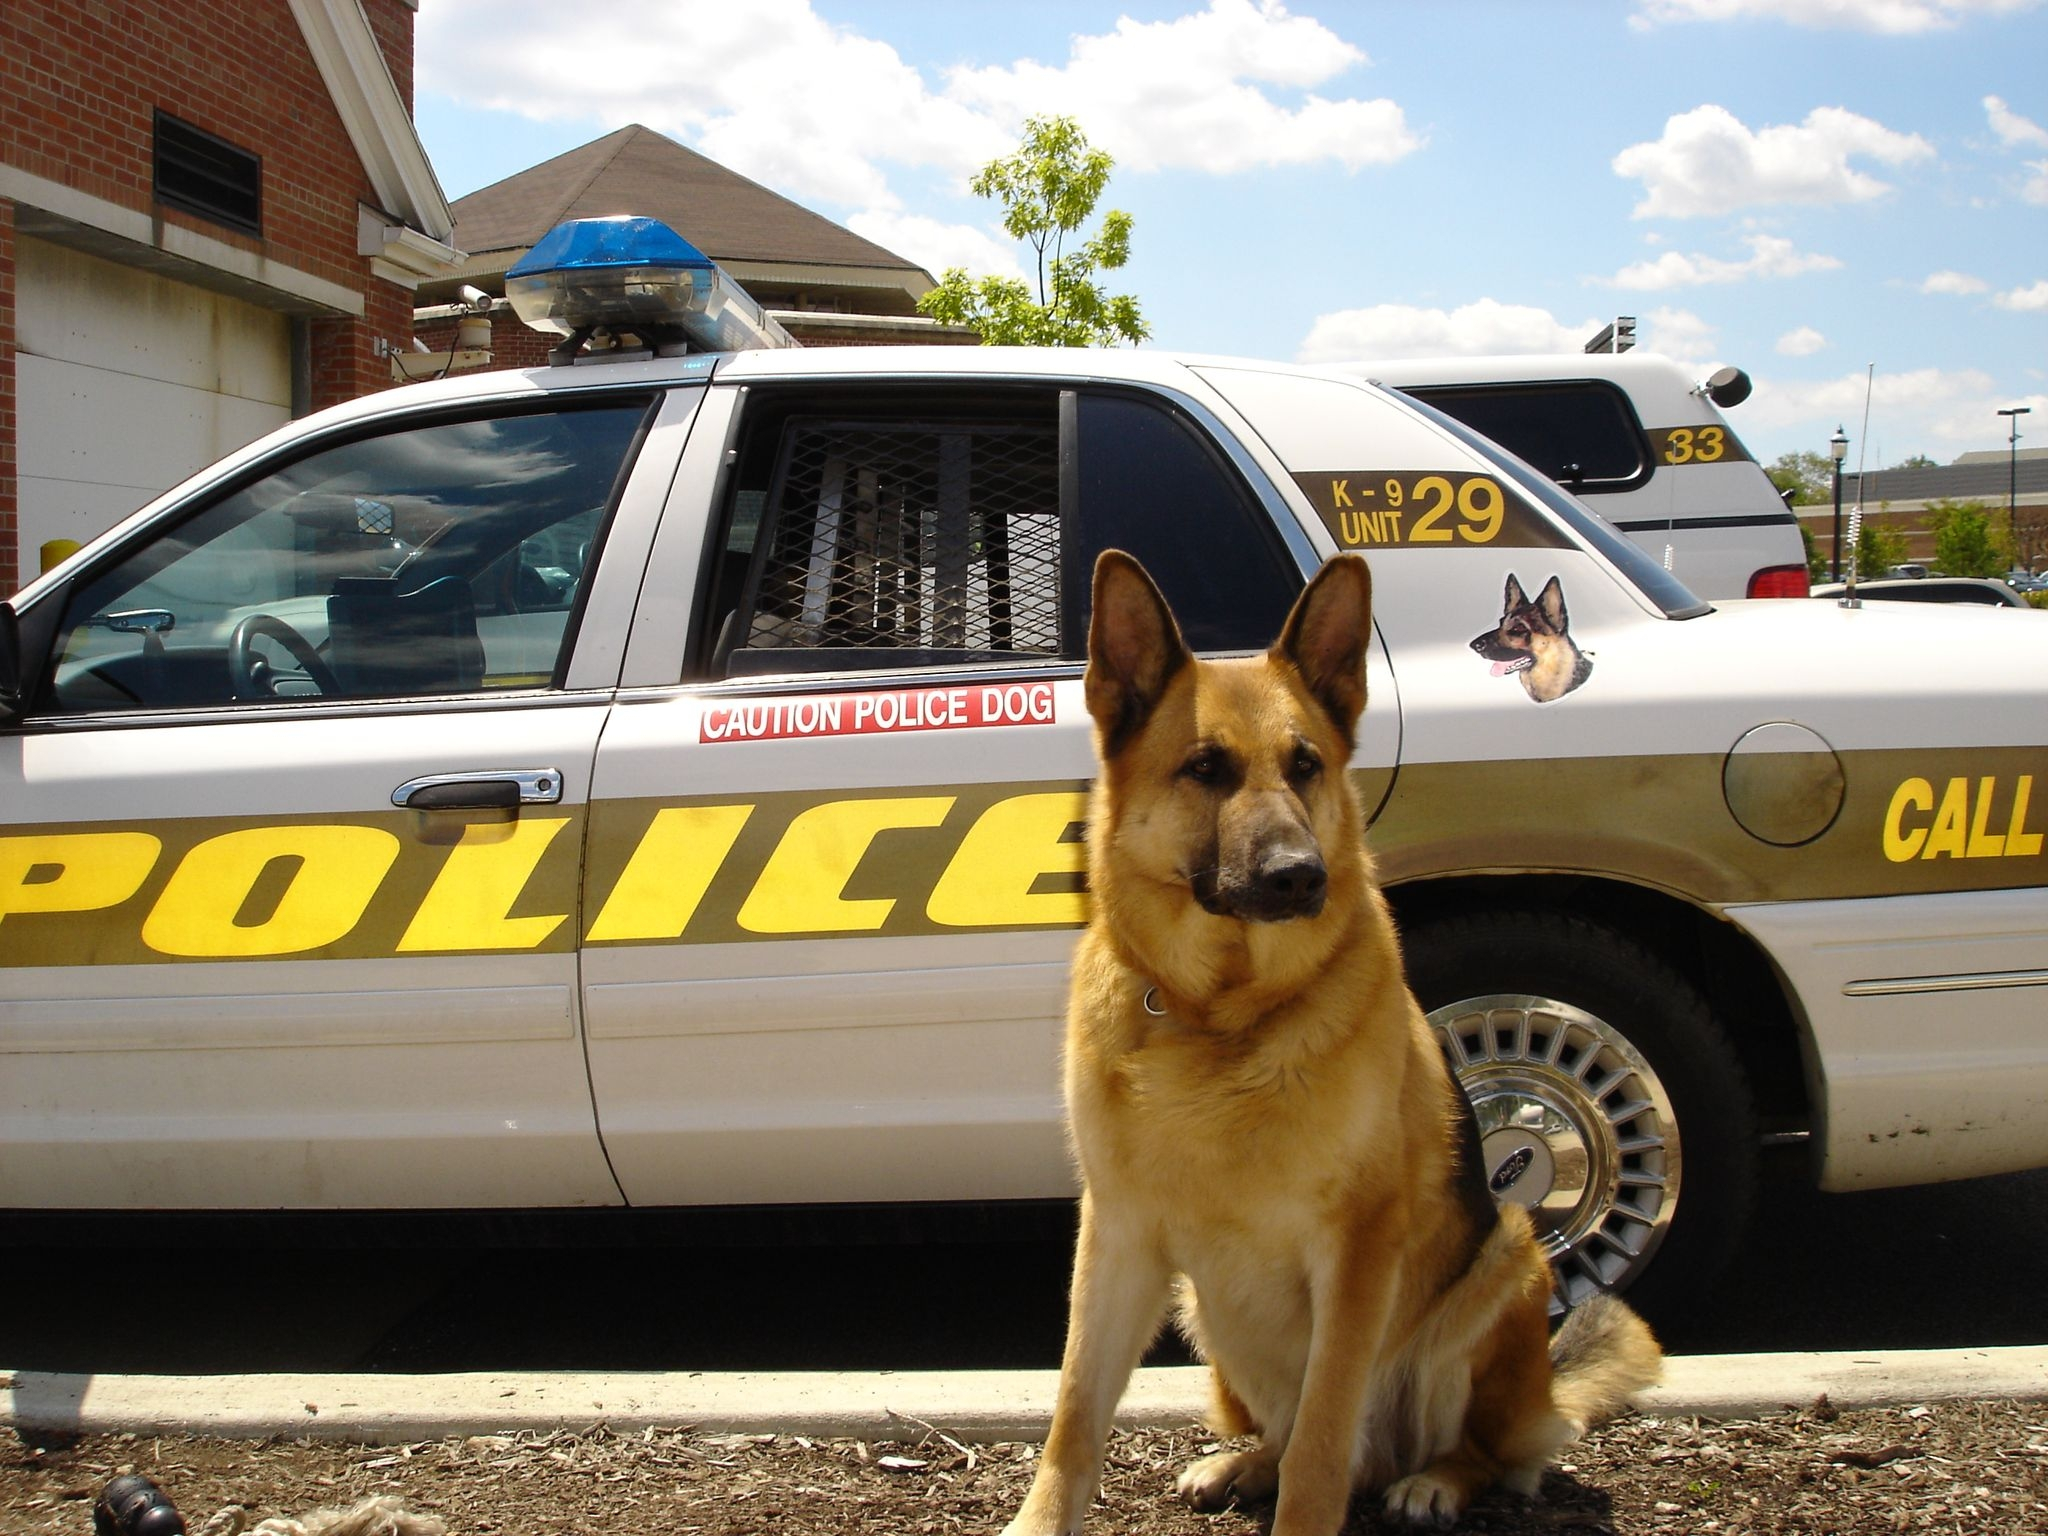 2048x1536 Wallpaper : dog, sheepdog, police, car CoolWallpapers 660255 HD Wallpapers